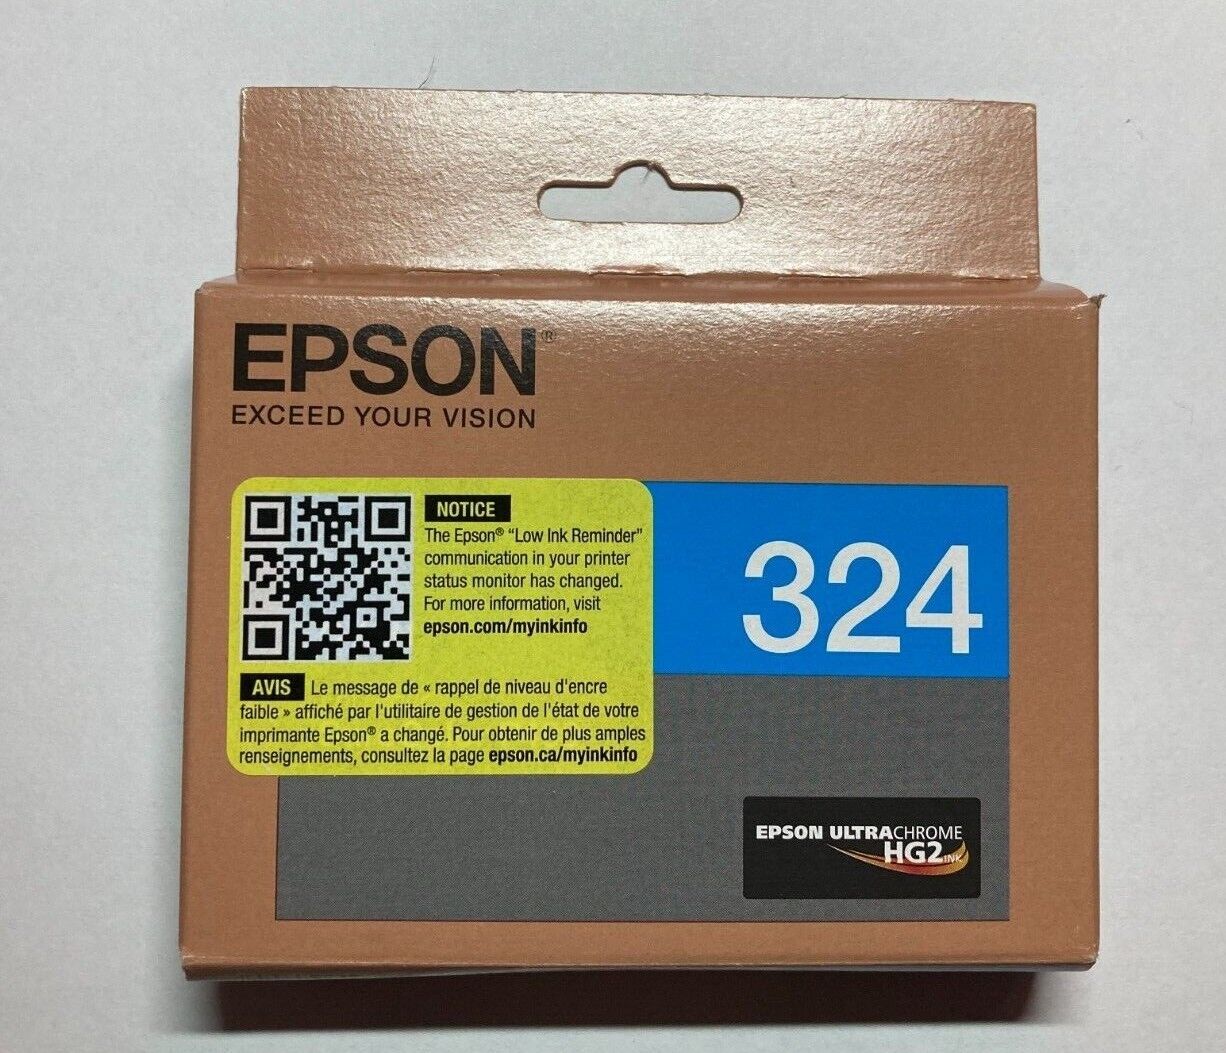 NEW Authentic Epson 324 Ink Cartridges for SureColor P400 ANY COLOR (singles)